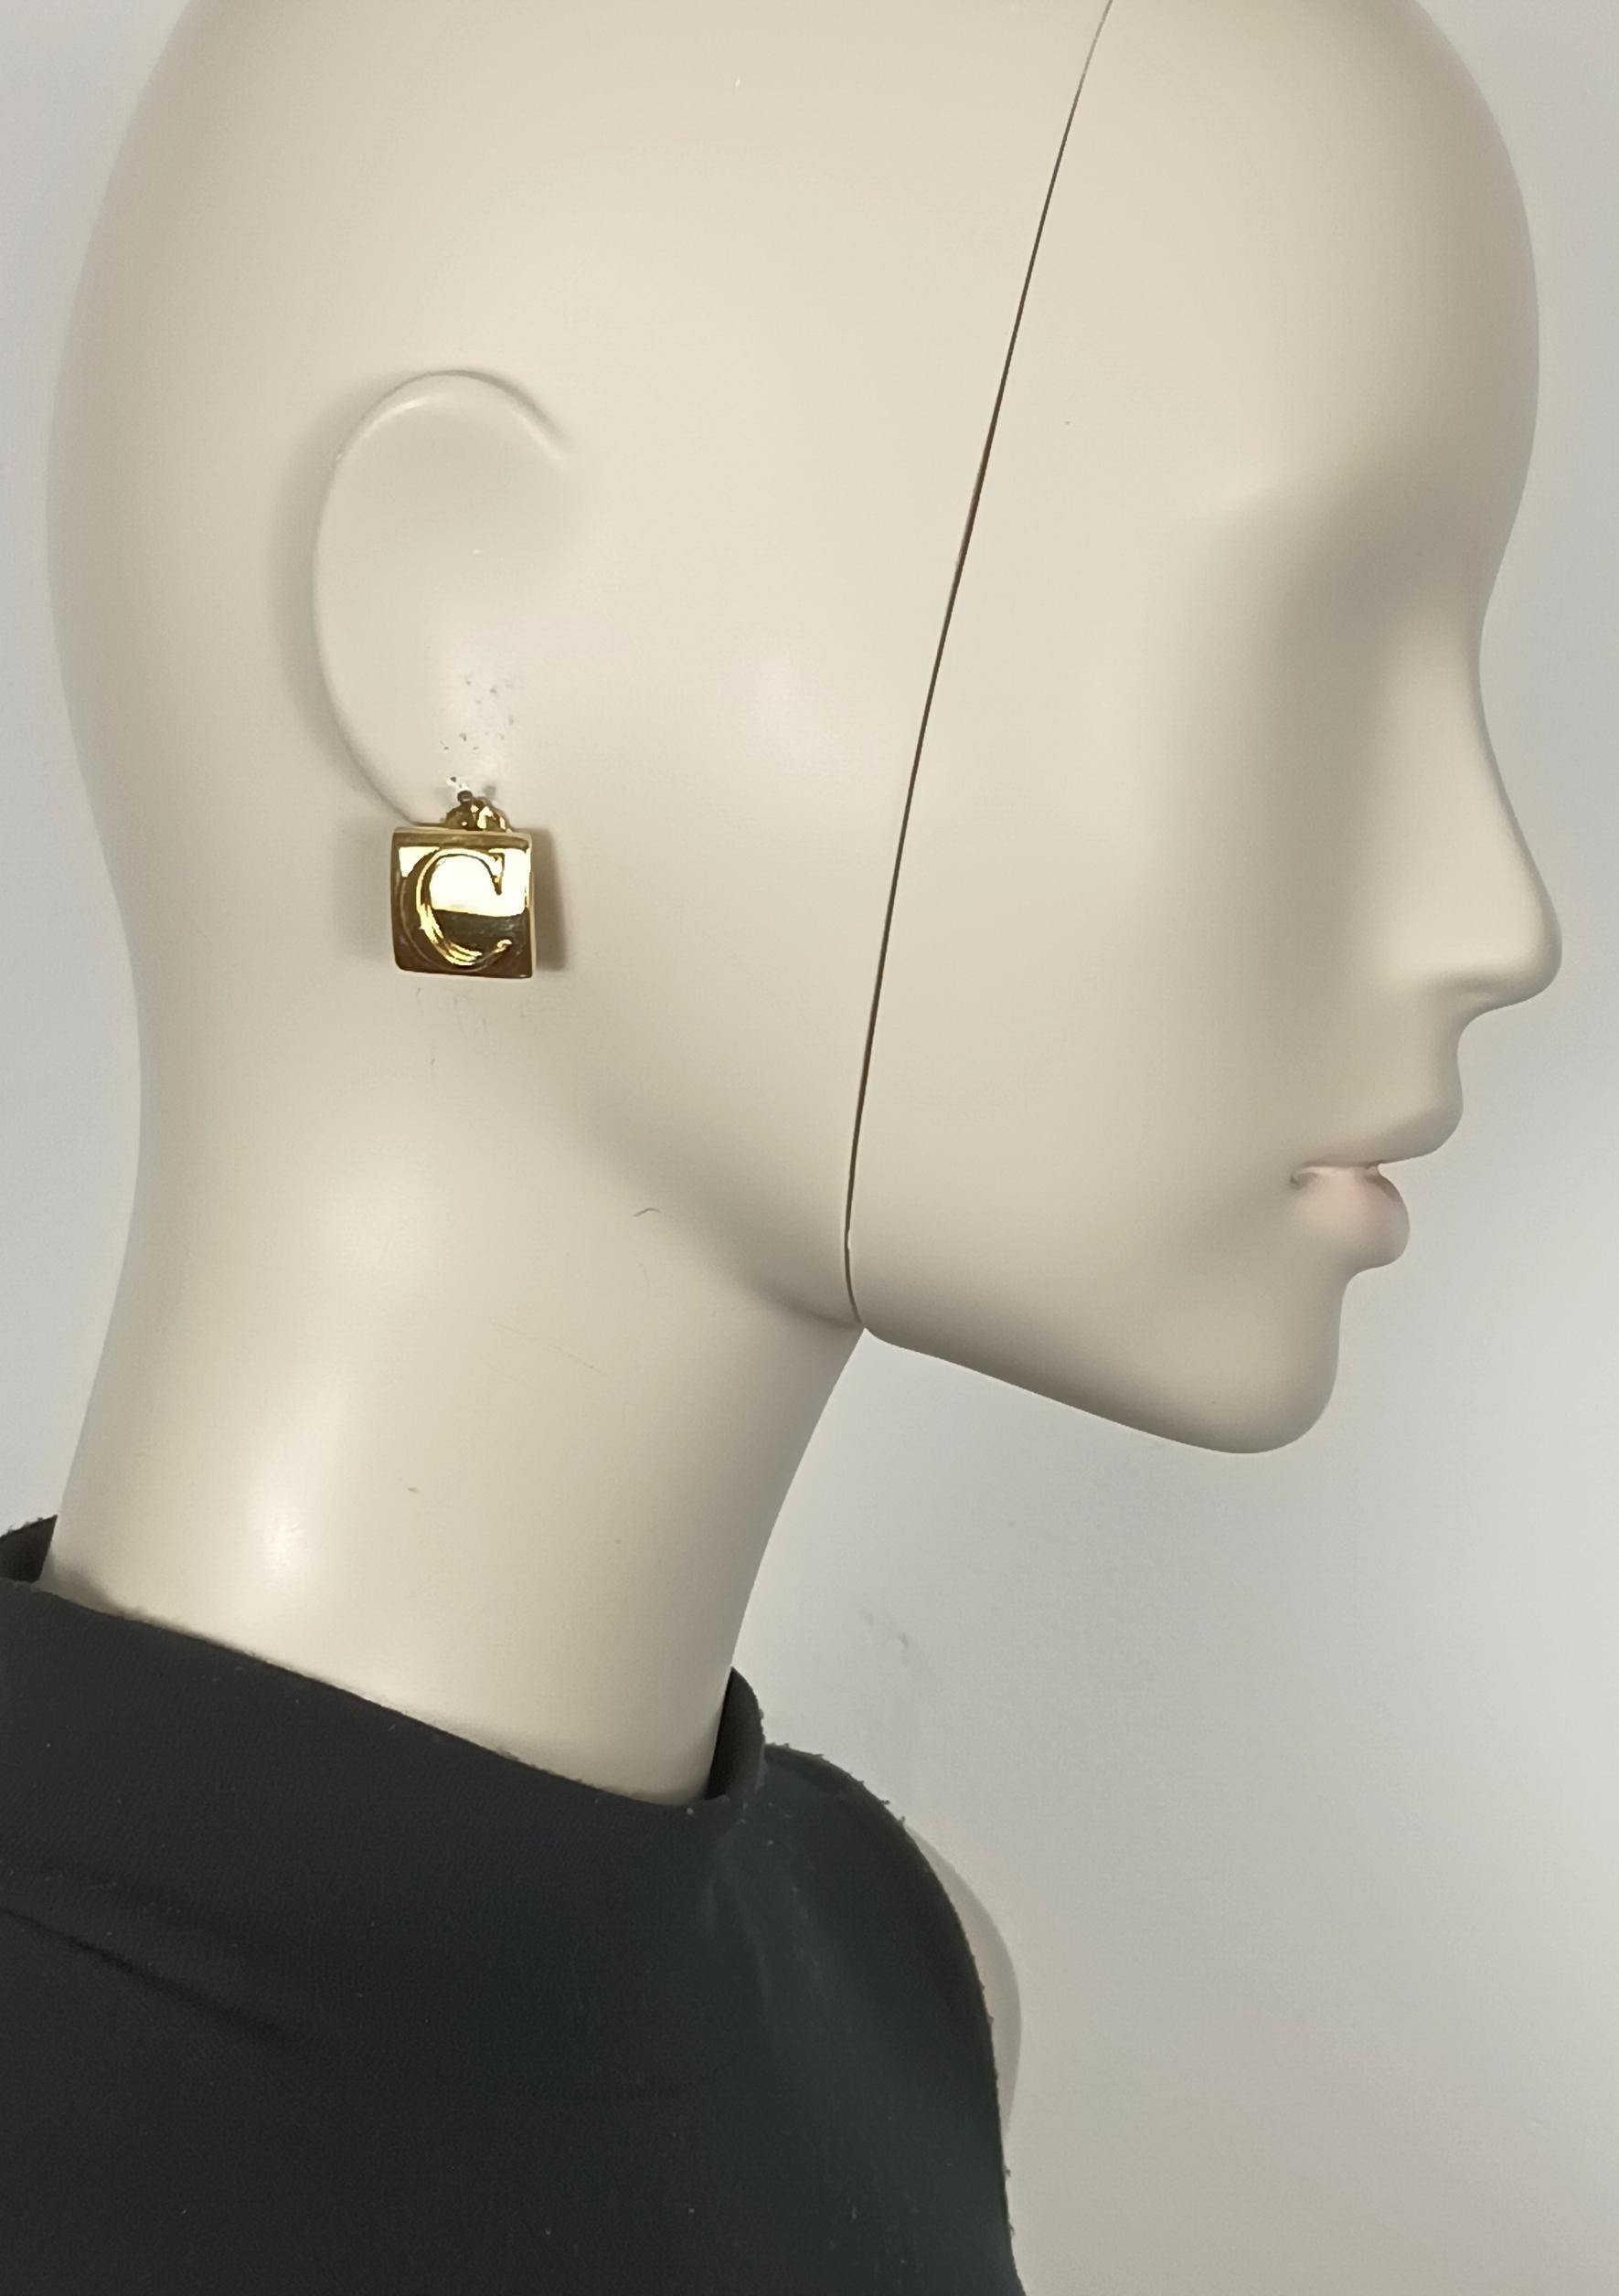 CHRISTIAN DIOR vintage gold tone C and D clip-on earrings.

Embossed DIOR.

Indicative measurements : approx. 1.7 cm x 1.7 cm (0.67 inch x 0.67 inch).

Material : Gold tone metal hardware.

Weight per earring : approx. 6 grams.

NOTES
- This is a